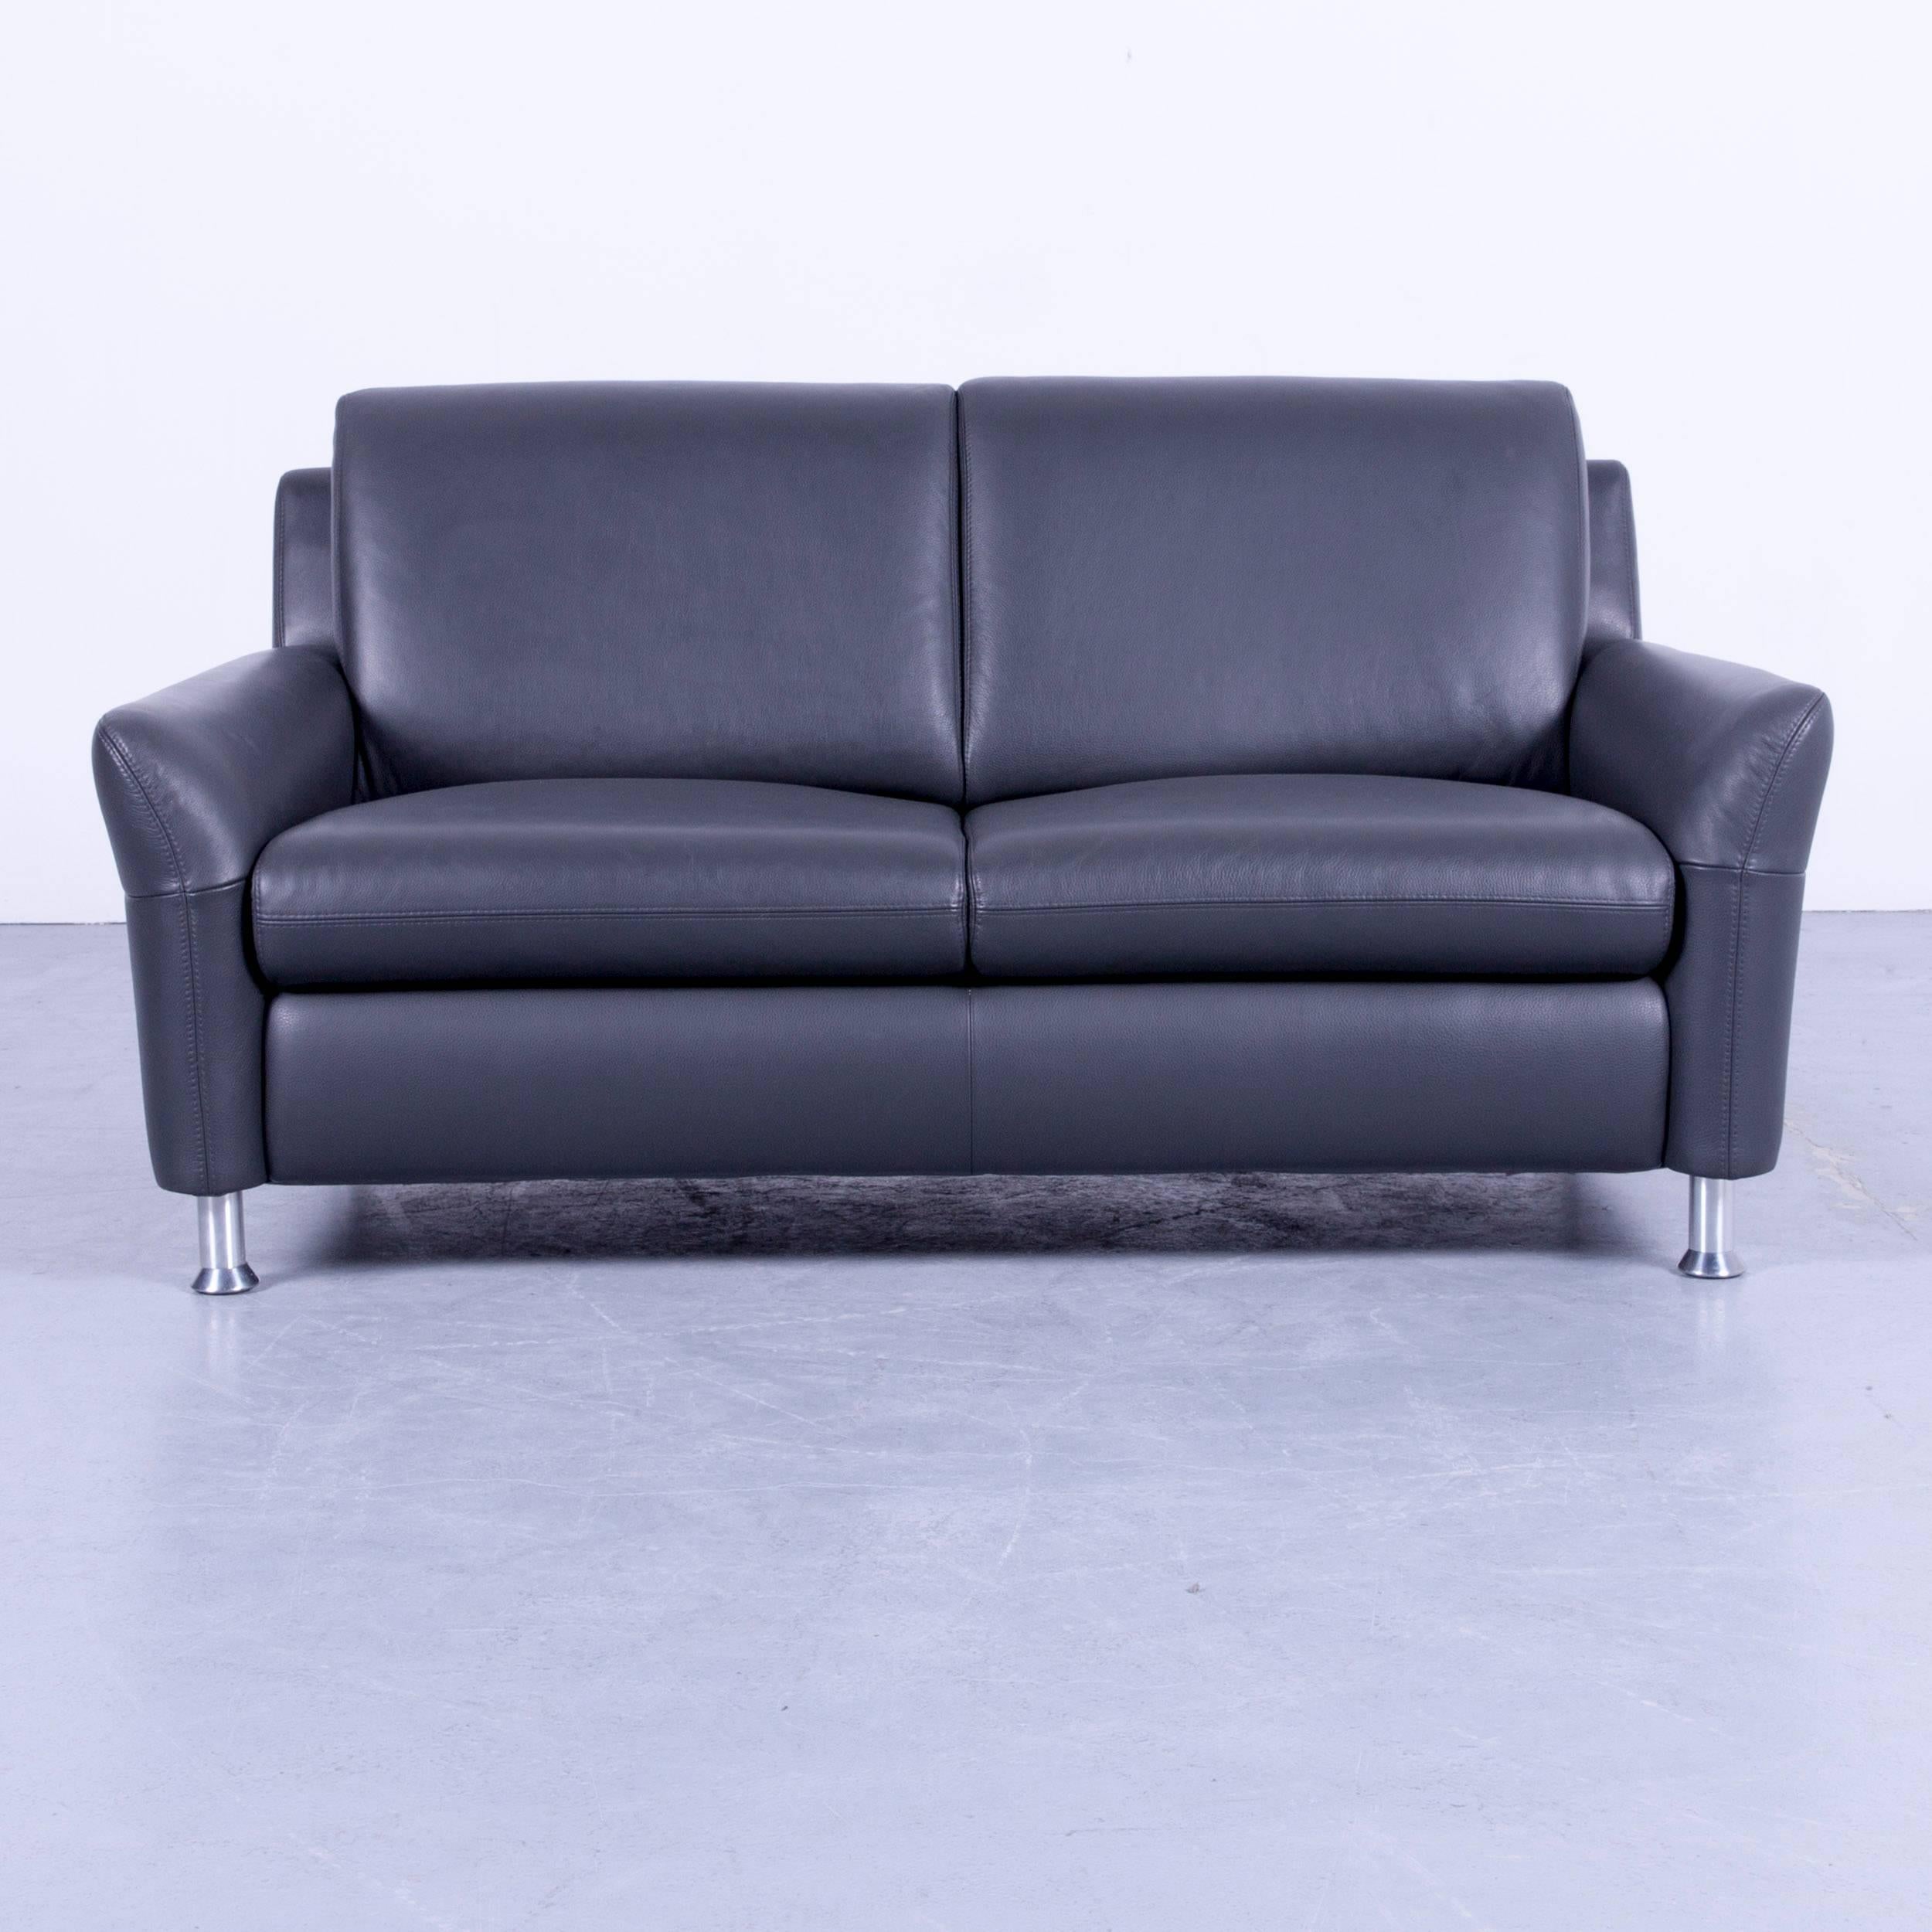 Grey colored original Willi Schillig designer leather sofa, in a minimalistic and modern design, made for pure comfort and style.